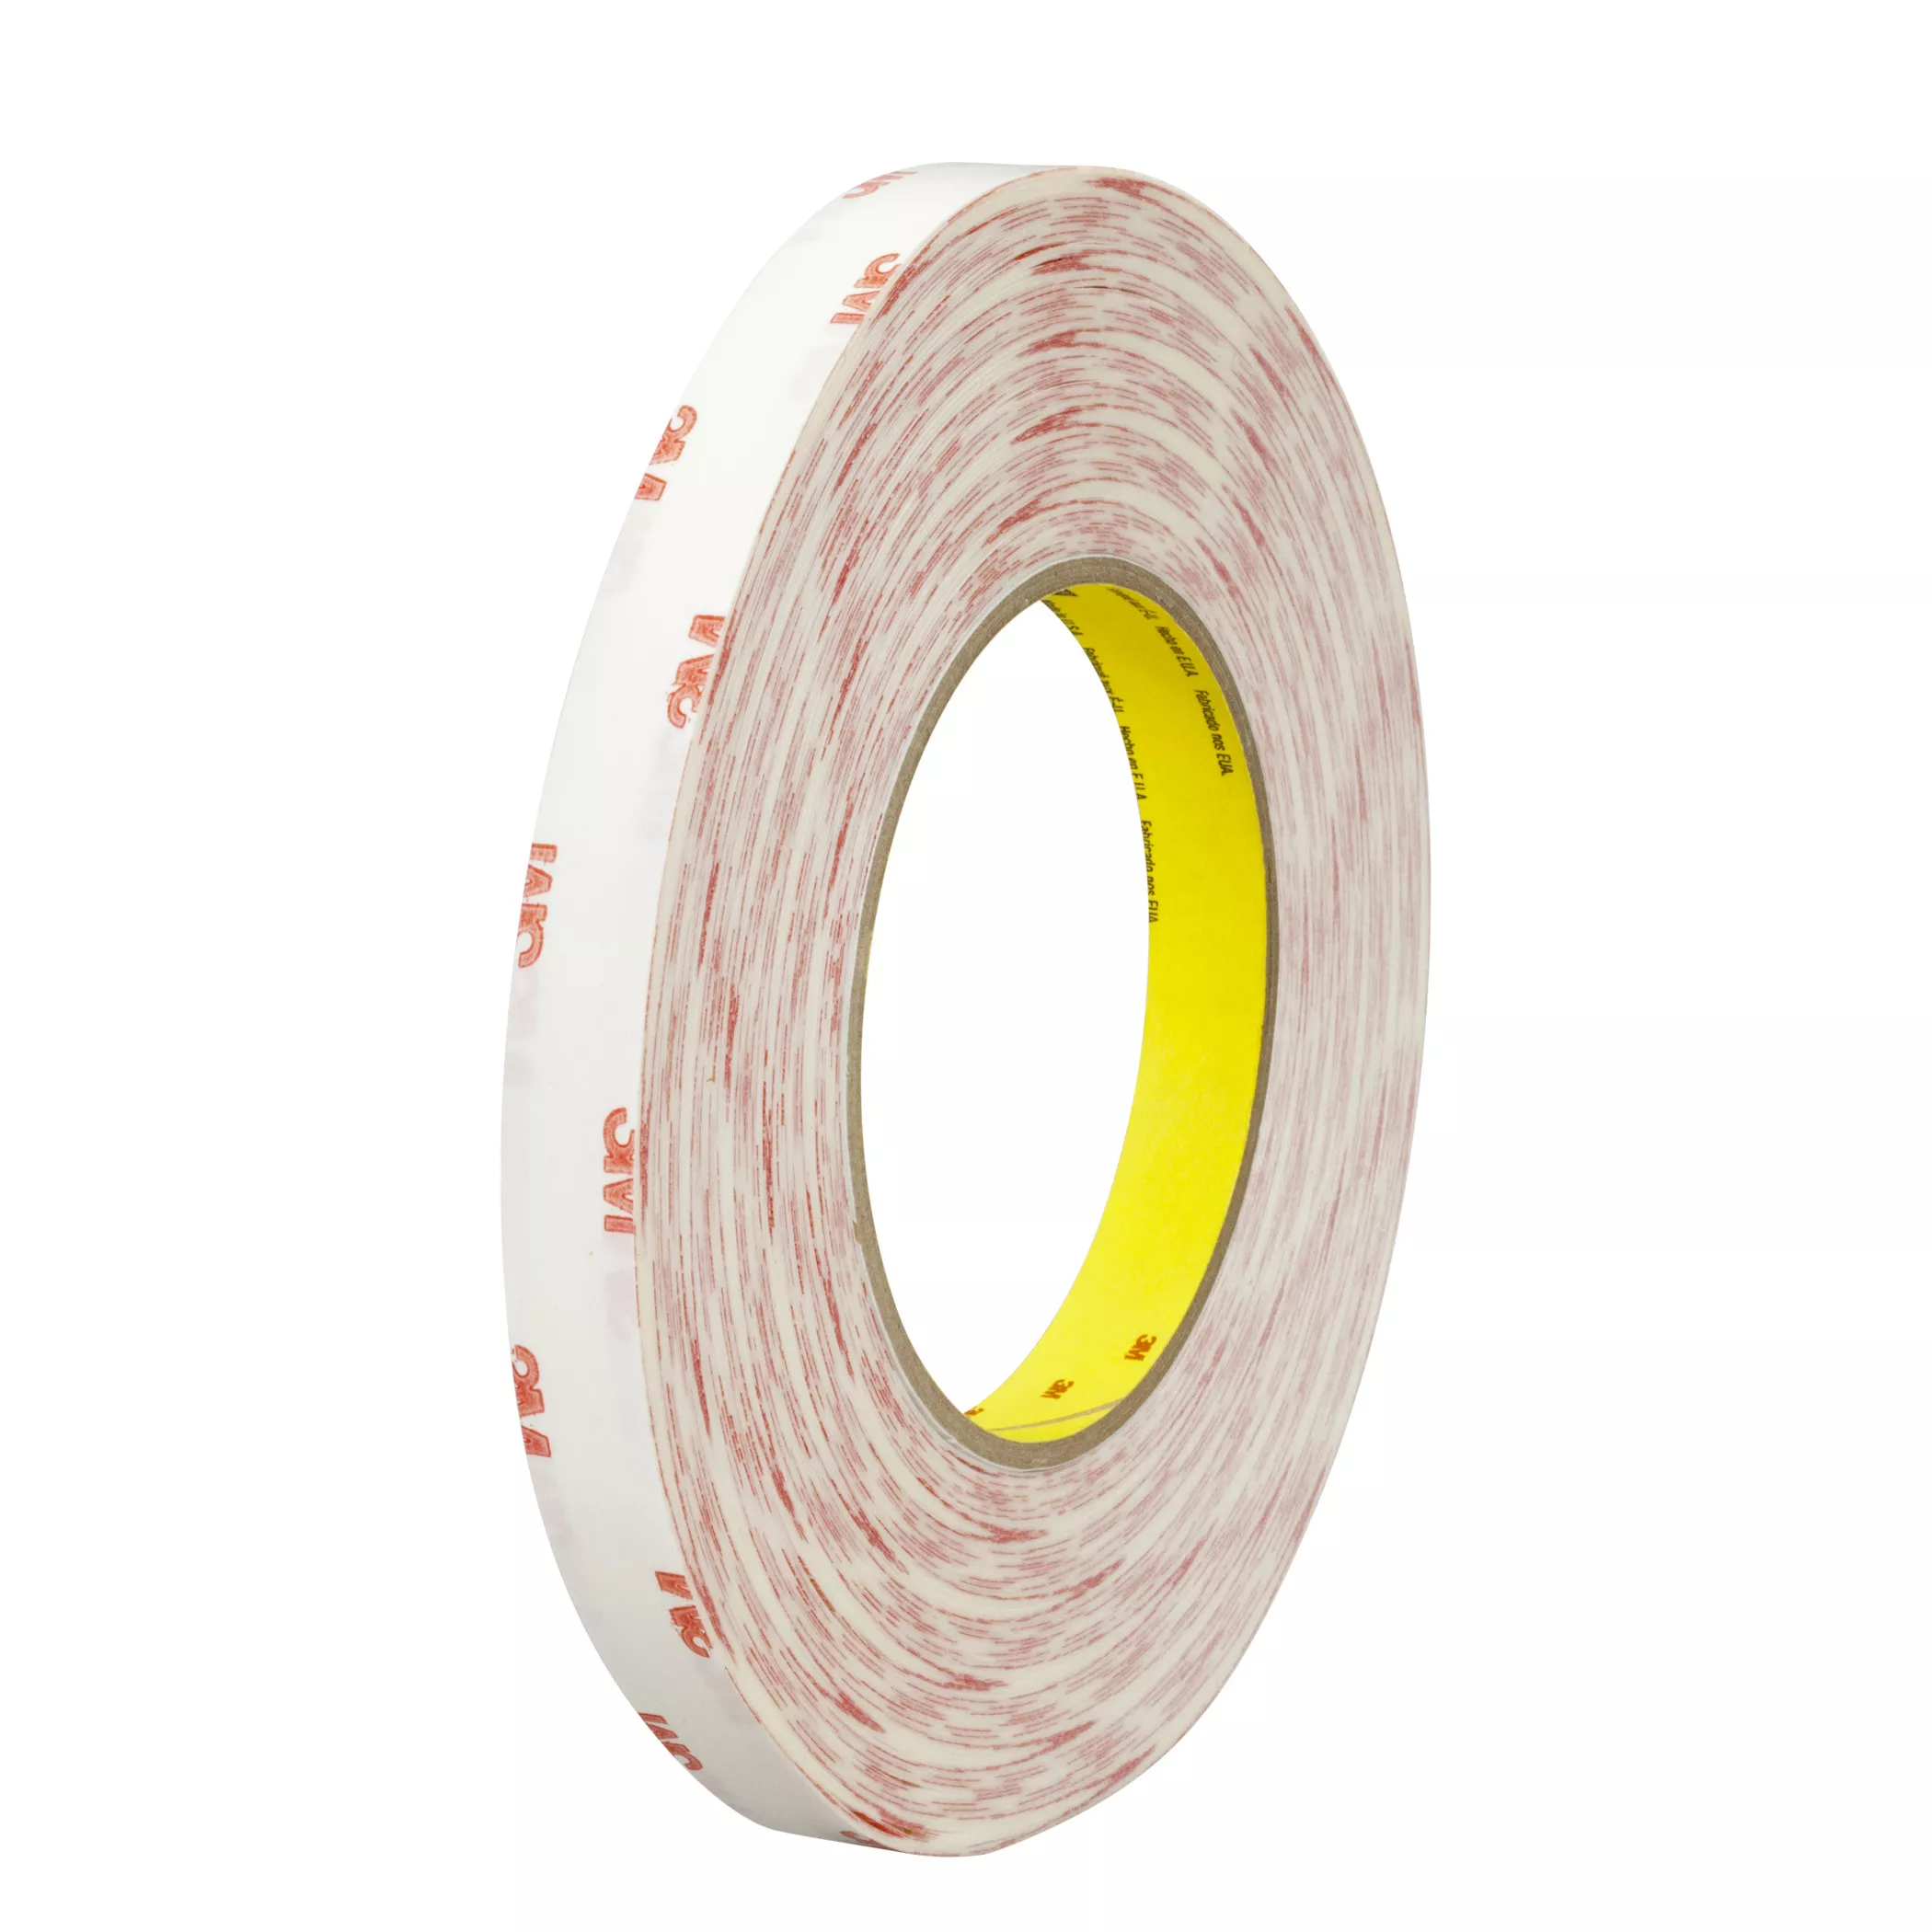 SKU 7010336281 | 3M™ Double Coated Tissue Tape 9456